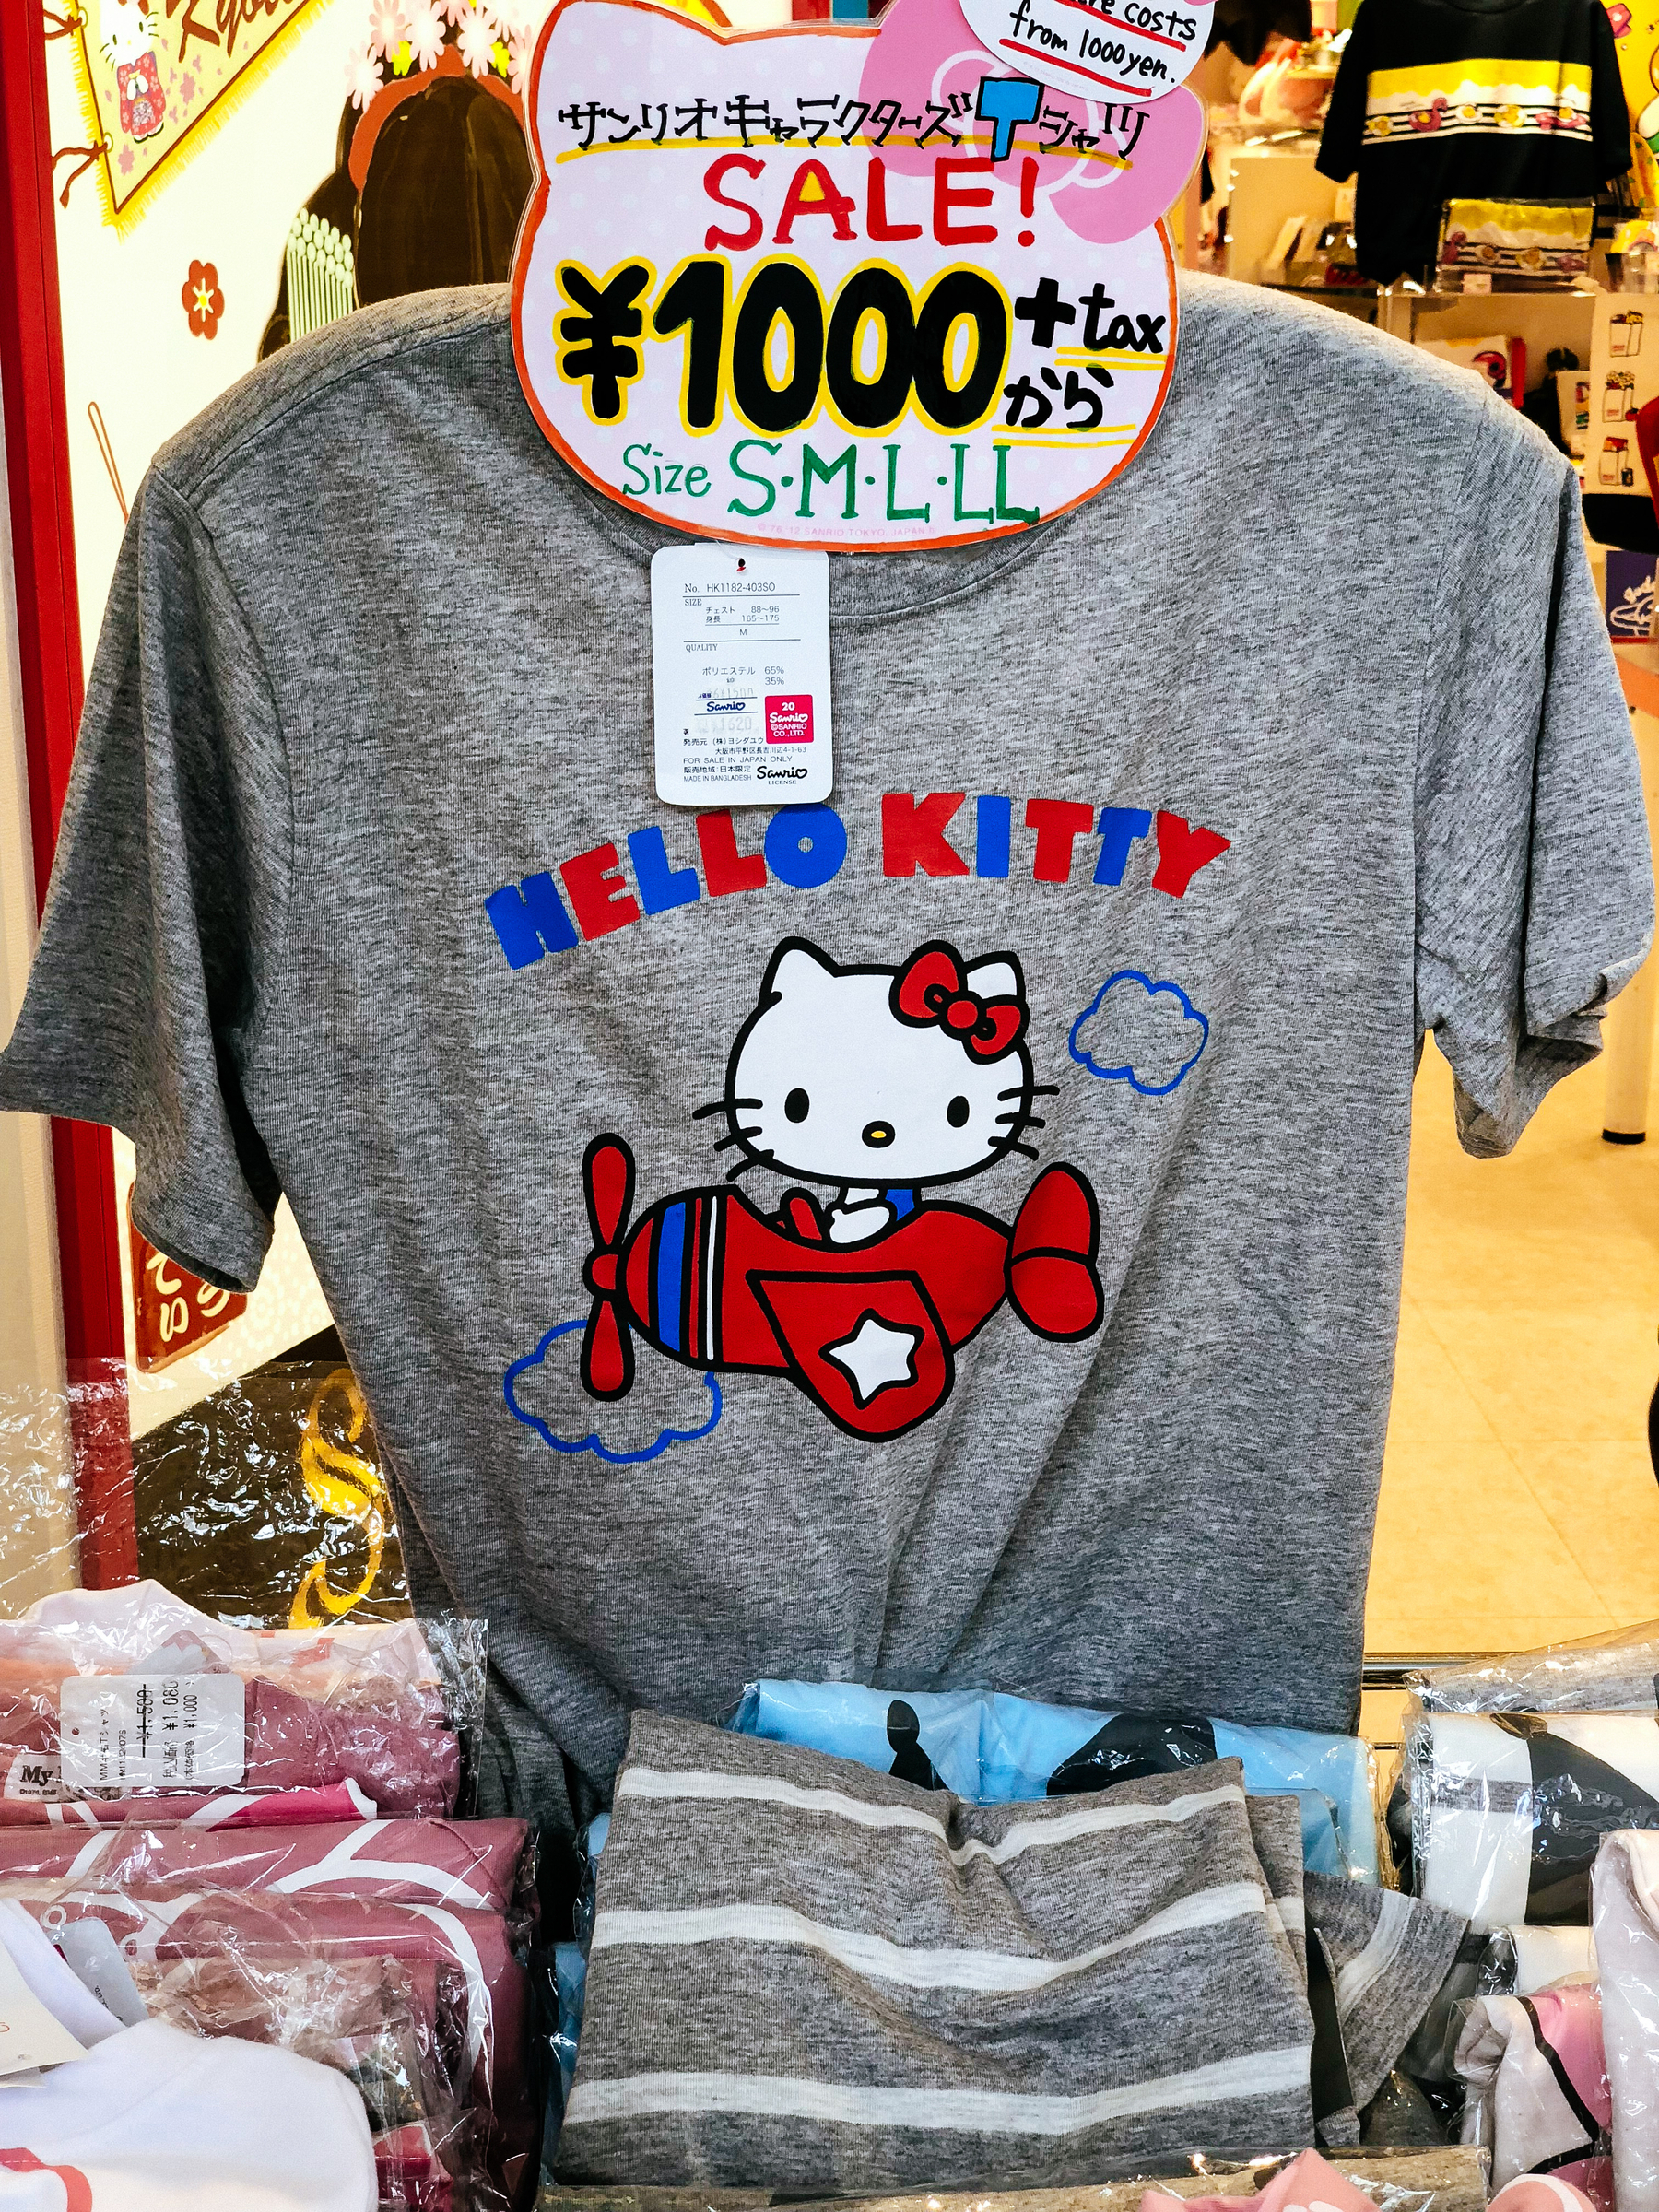 An Hello Kitty shirt, with Hello Kitty flying an airplane. It’s on sale, ¥1000. 